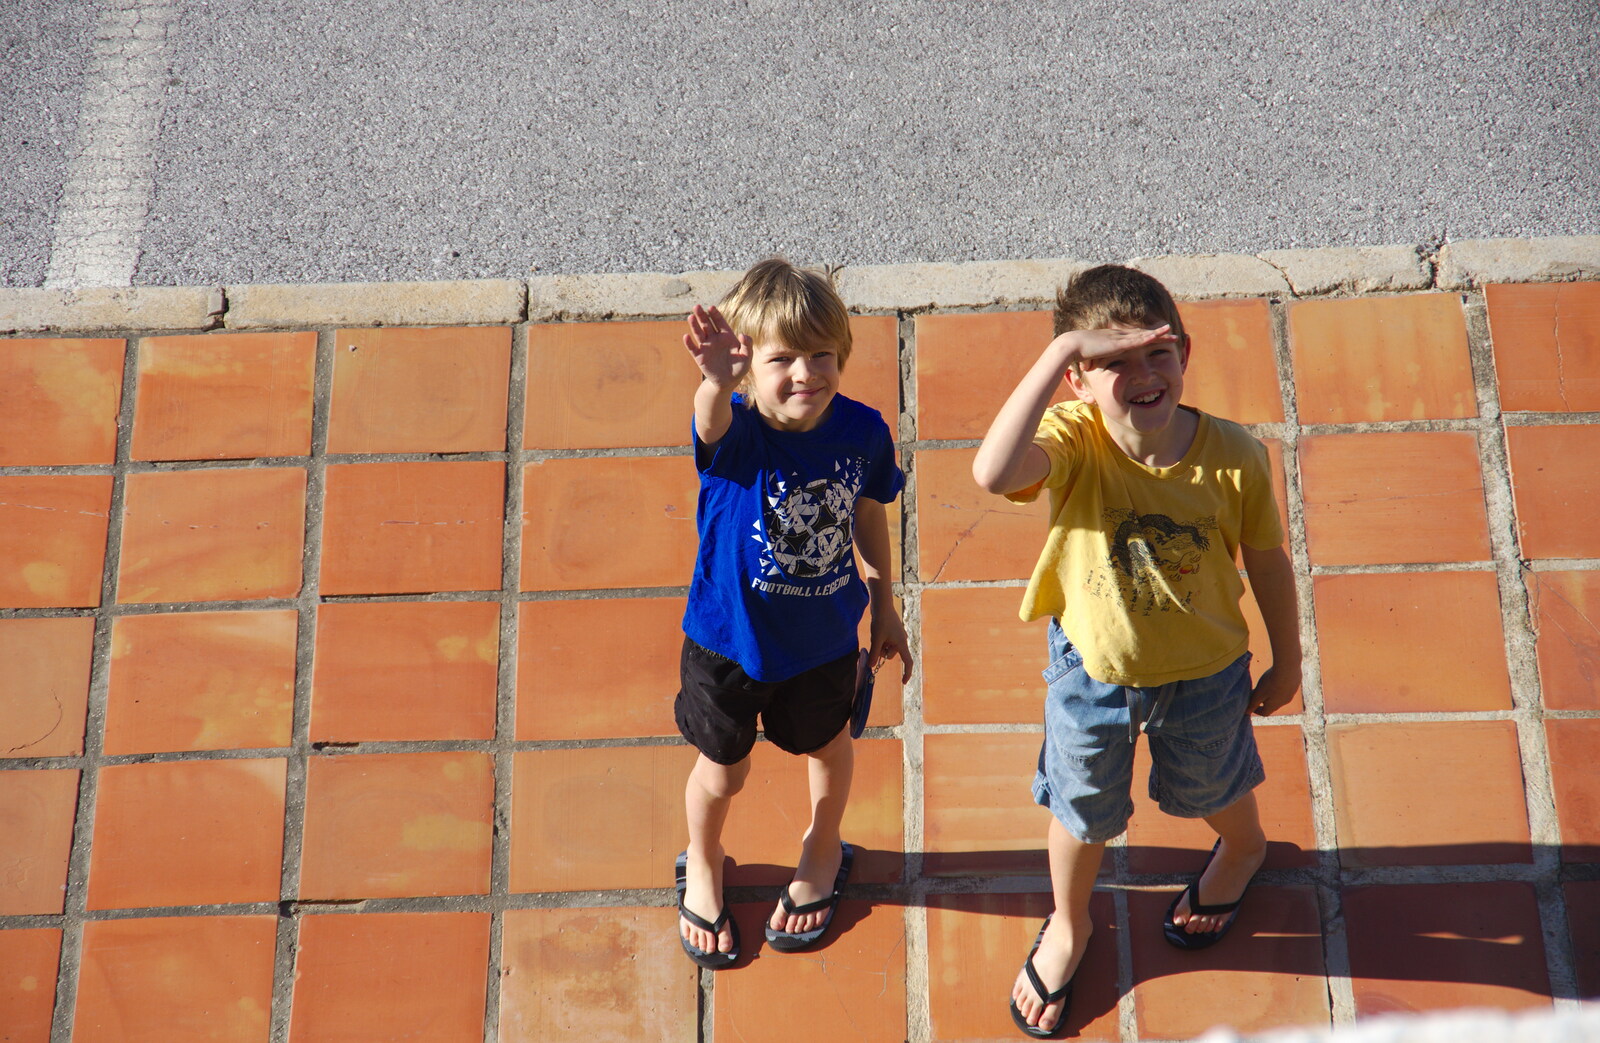 The boys down on the pavement from A Holiday in Nerja, Andalusia, Spain - 15th April 2019